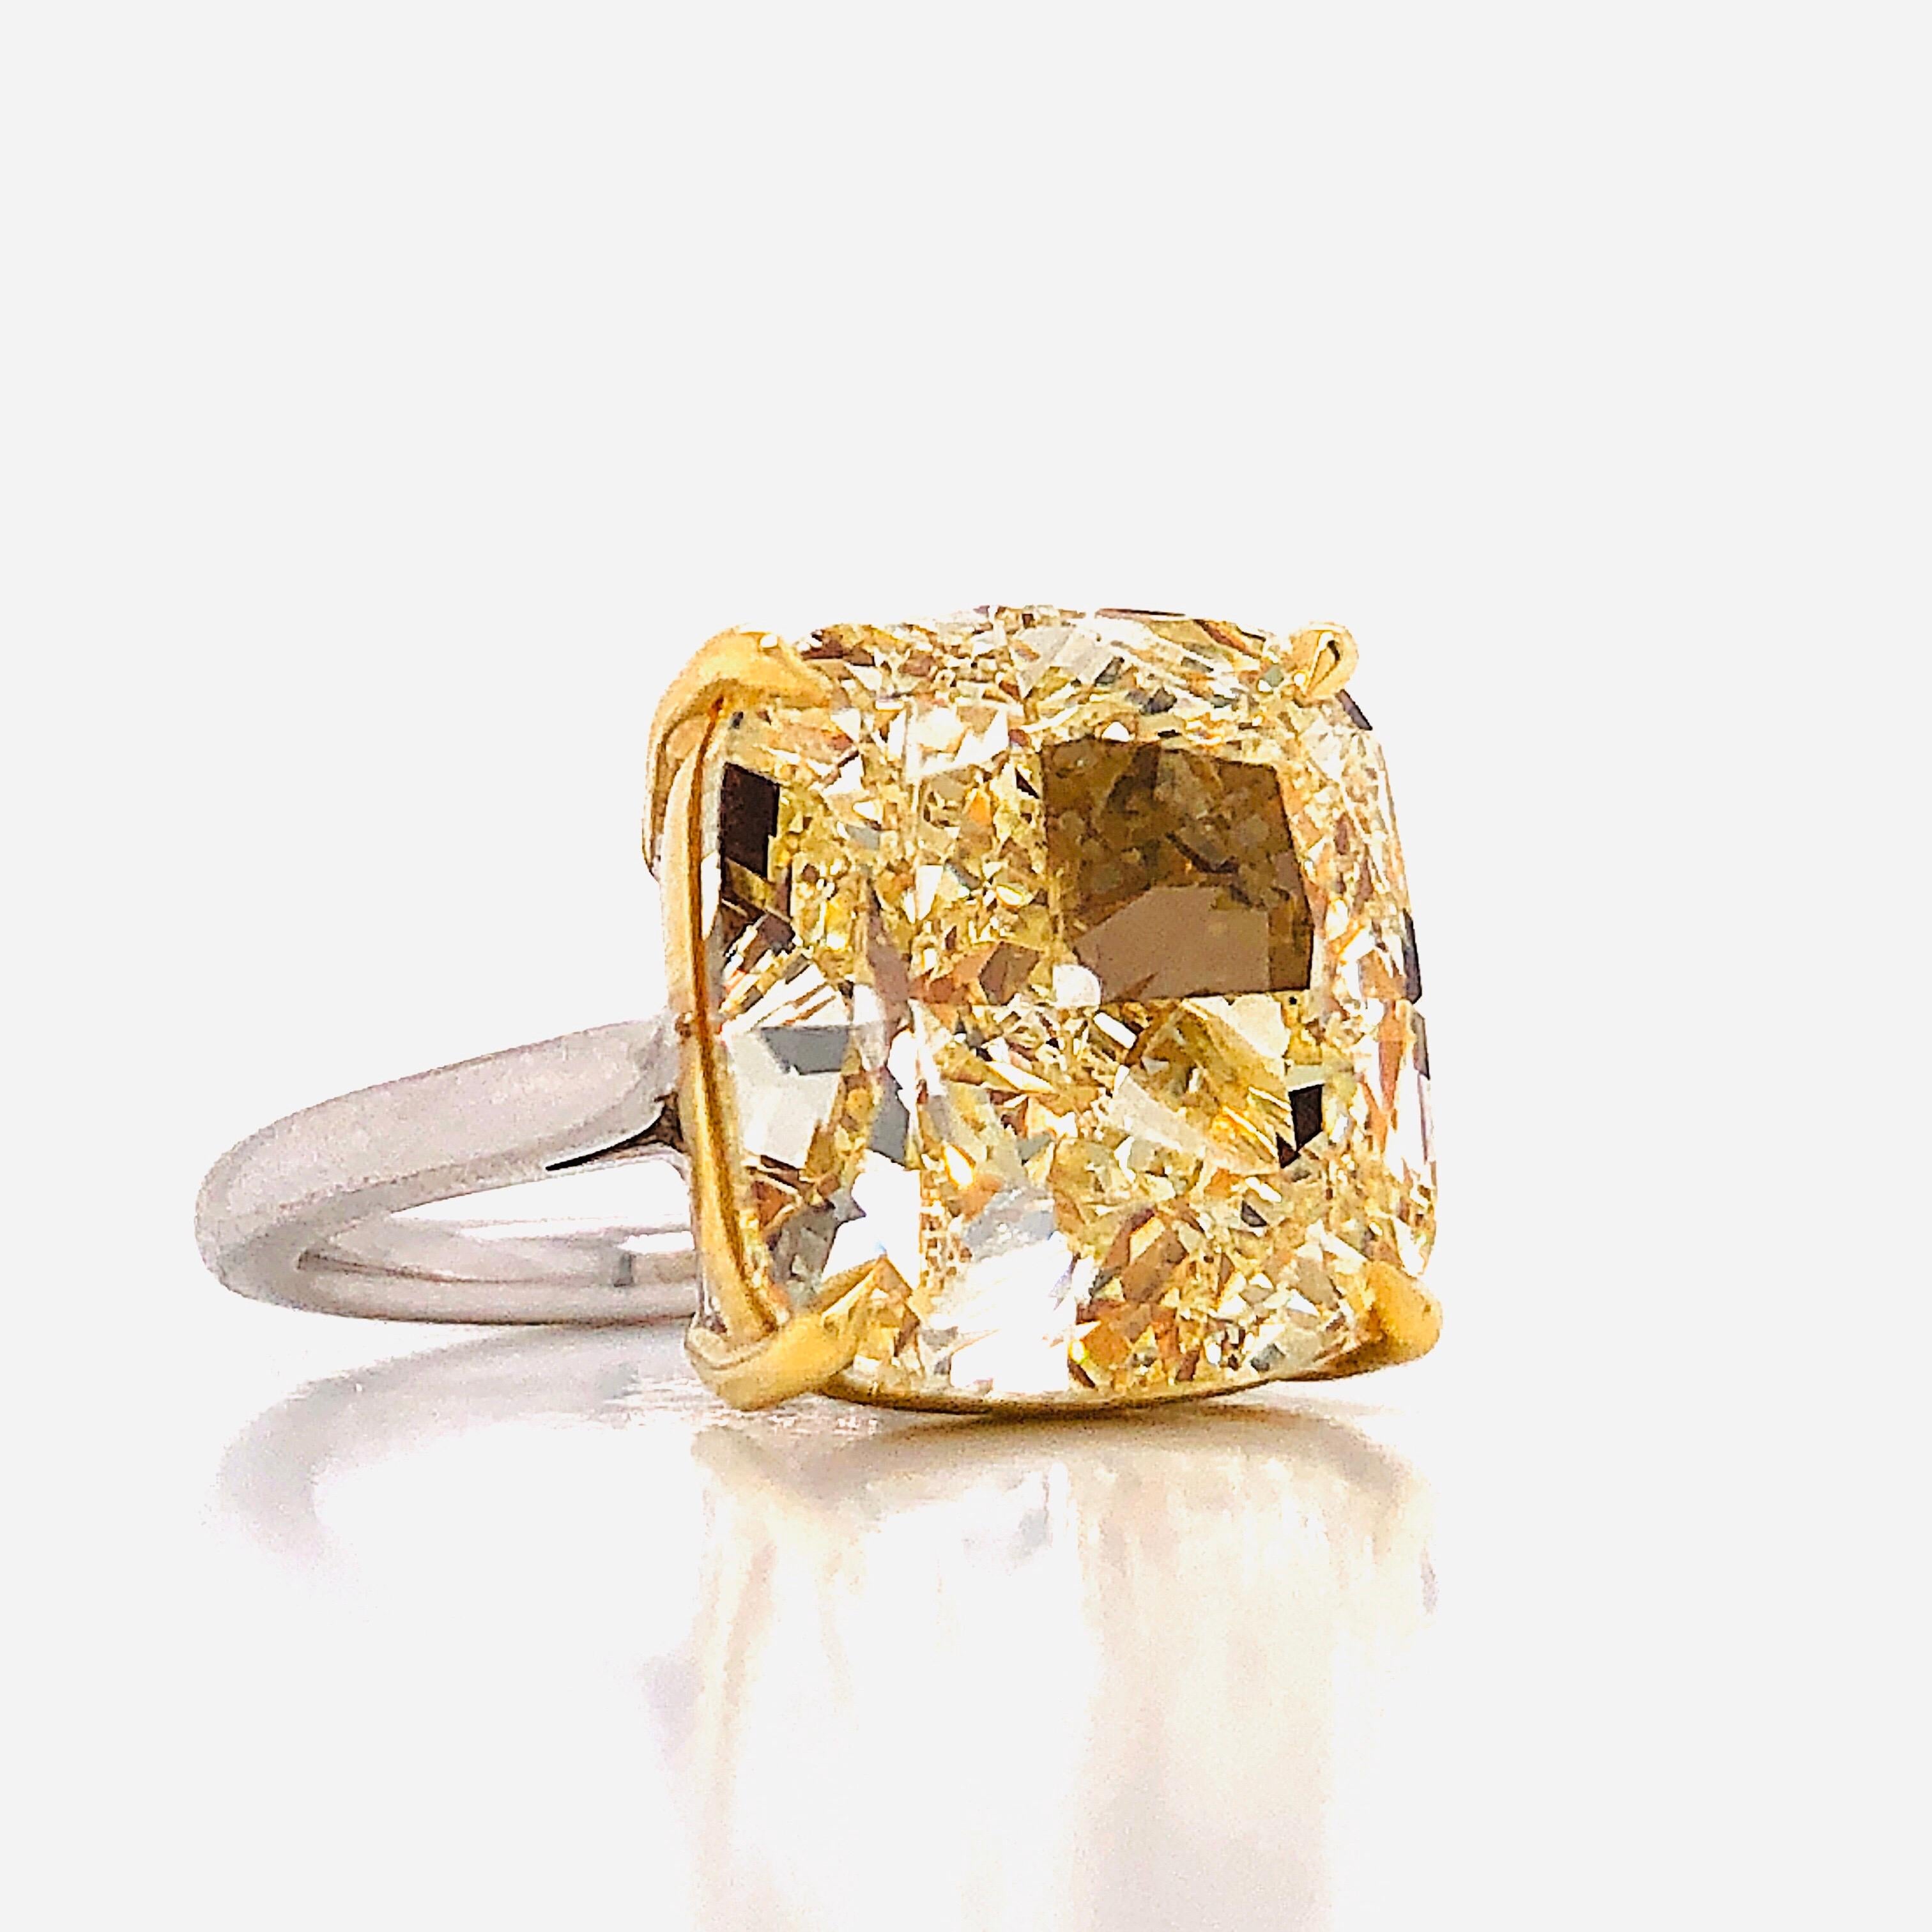 Showcasing a spectacular GIA certified 12 Carat Natural fancy yellow diamonds with excellent saturation throughout. The clarity is Vs2 with and an exceptionally clean diamond. Simply send us a message to request a copy of the GIA report.
Ring